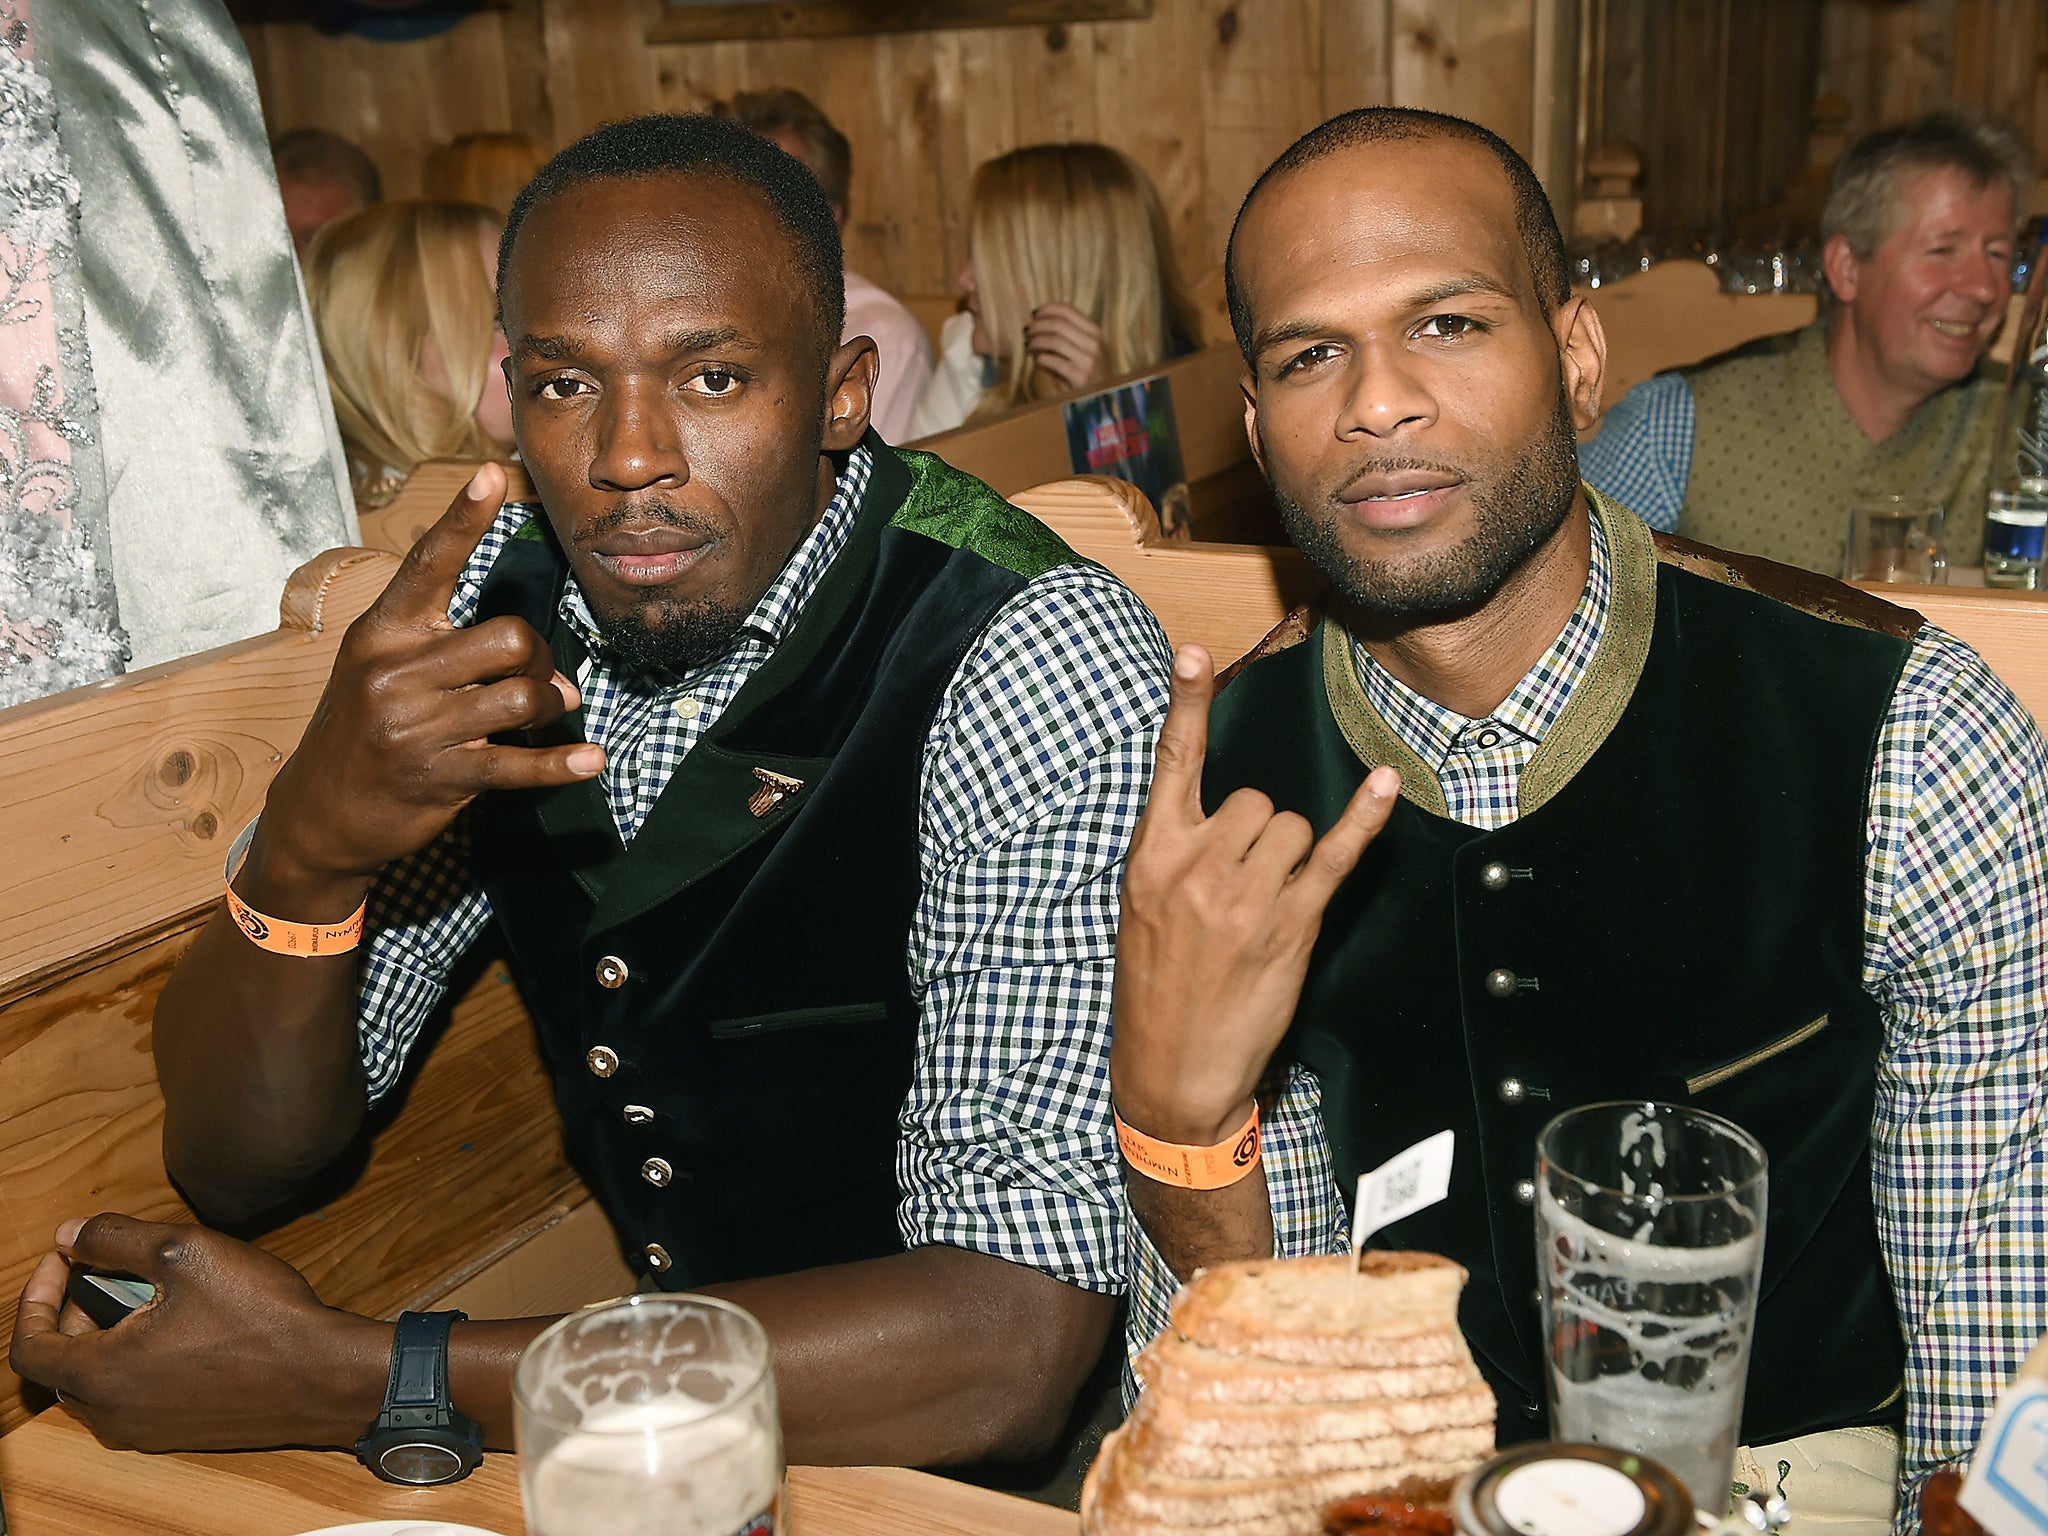 Jamaican sprinter Usain Bolt and Jamaican-born British high jumper Germaine Mason during a visit to one of the beer tents of the 'Oktoberfest' in Munich, Germany